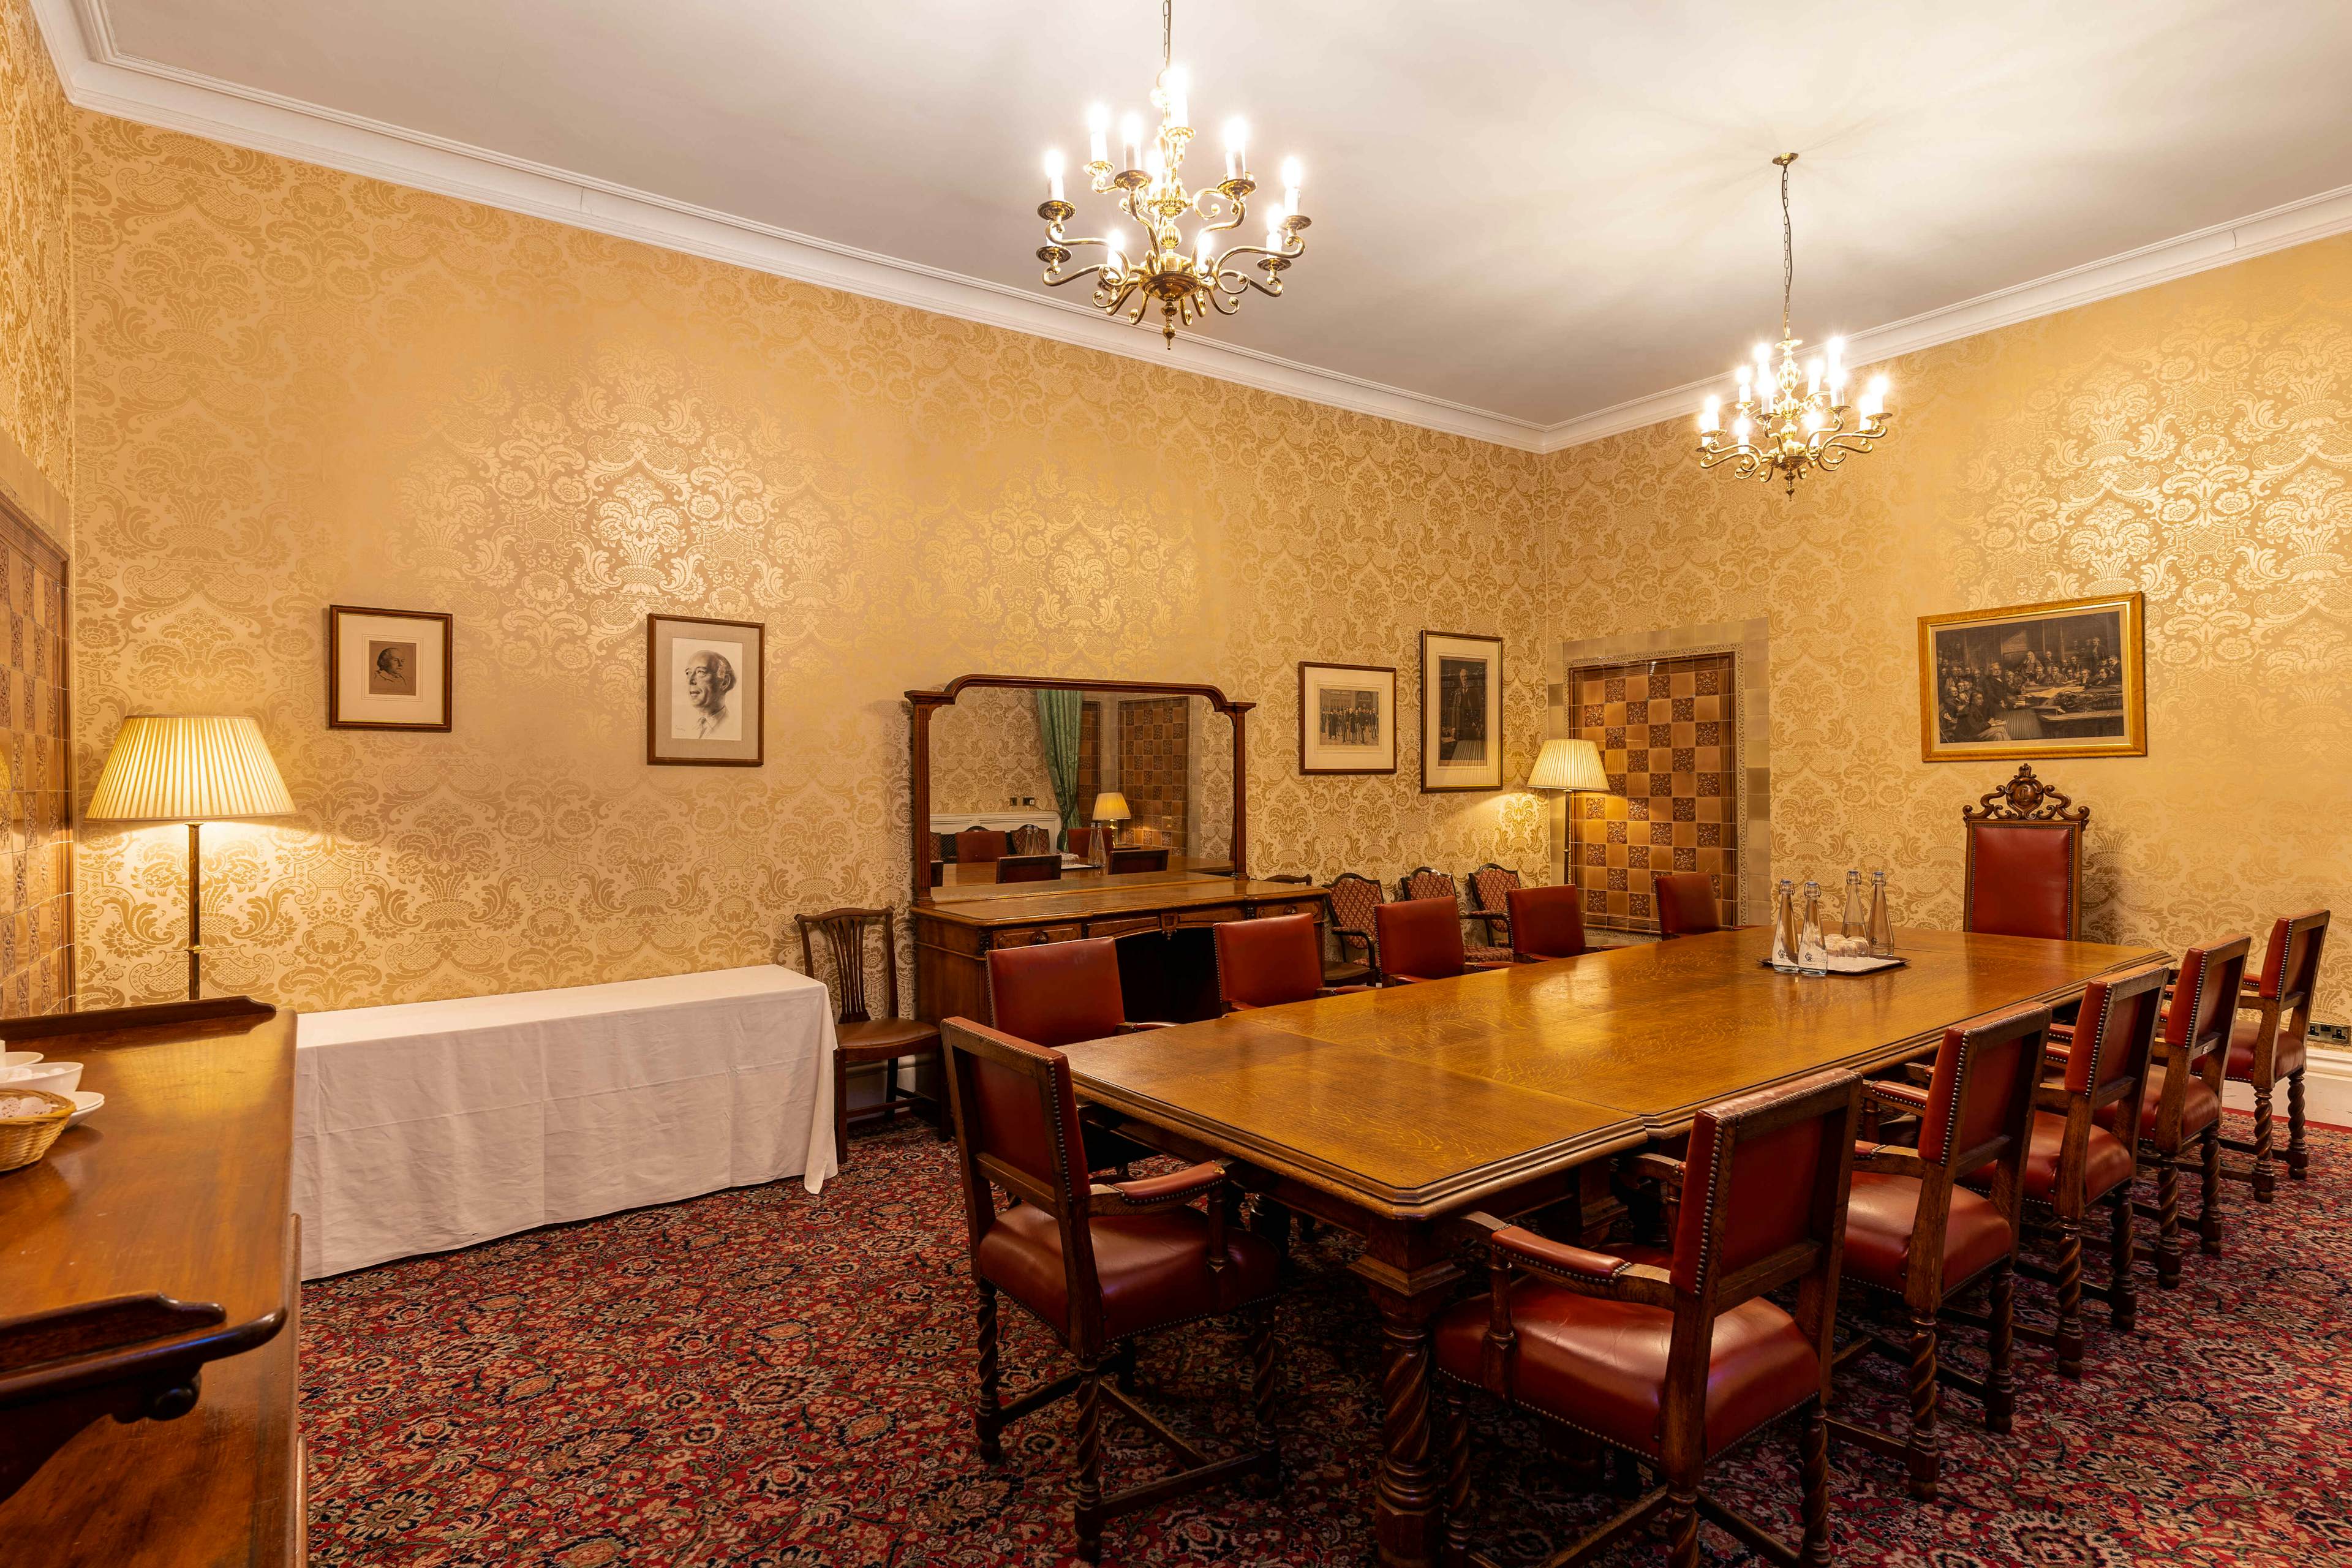 The National Liberal Club - Lawrence Robson Room image 1